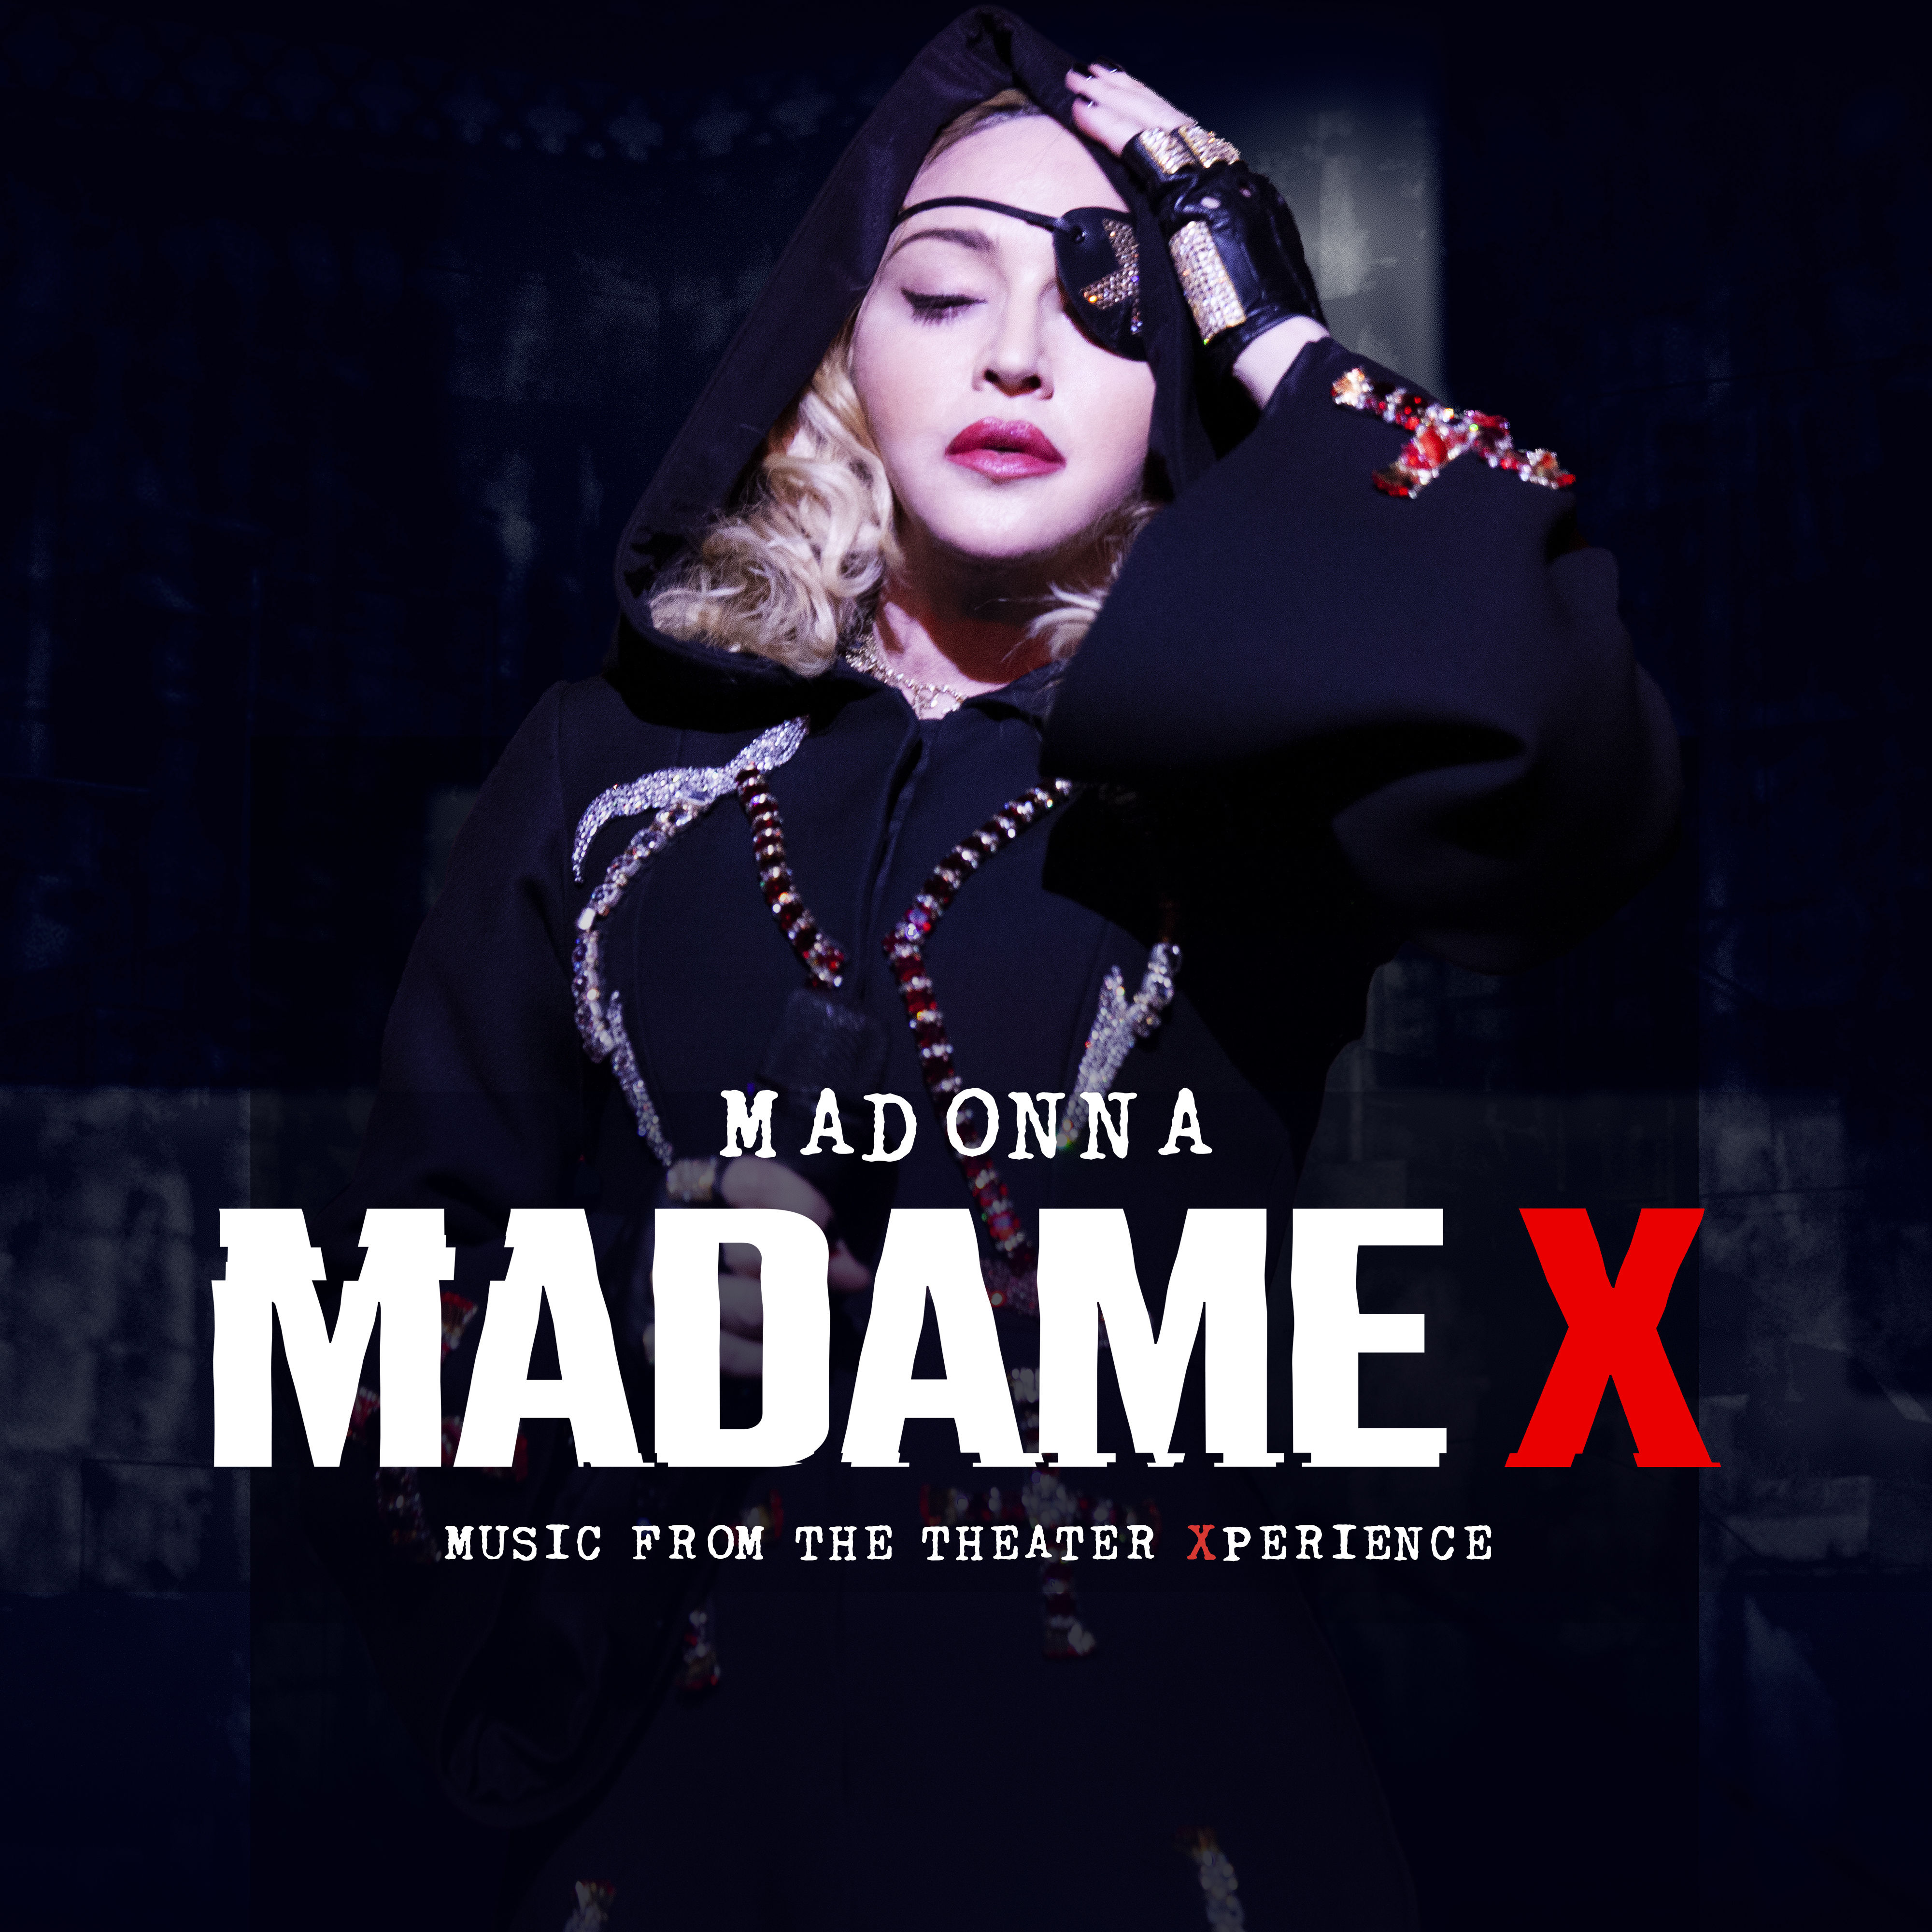 Madonna - Madame X - Music From The Theater Xperience (2021) [FLAC 24bit/48kHz]